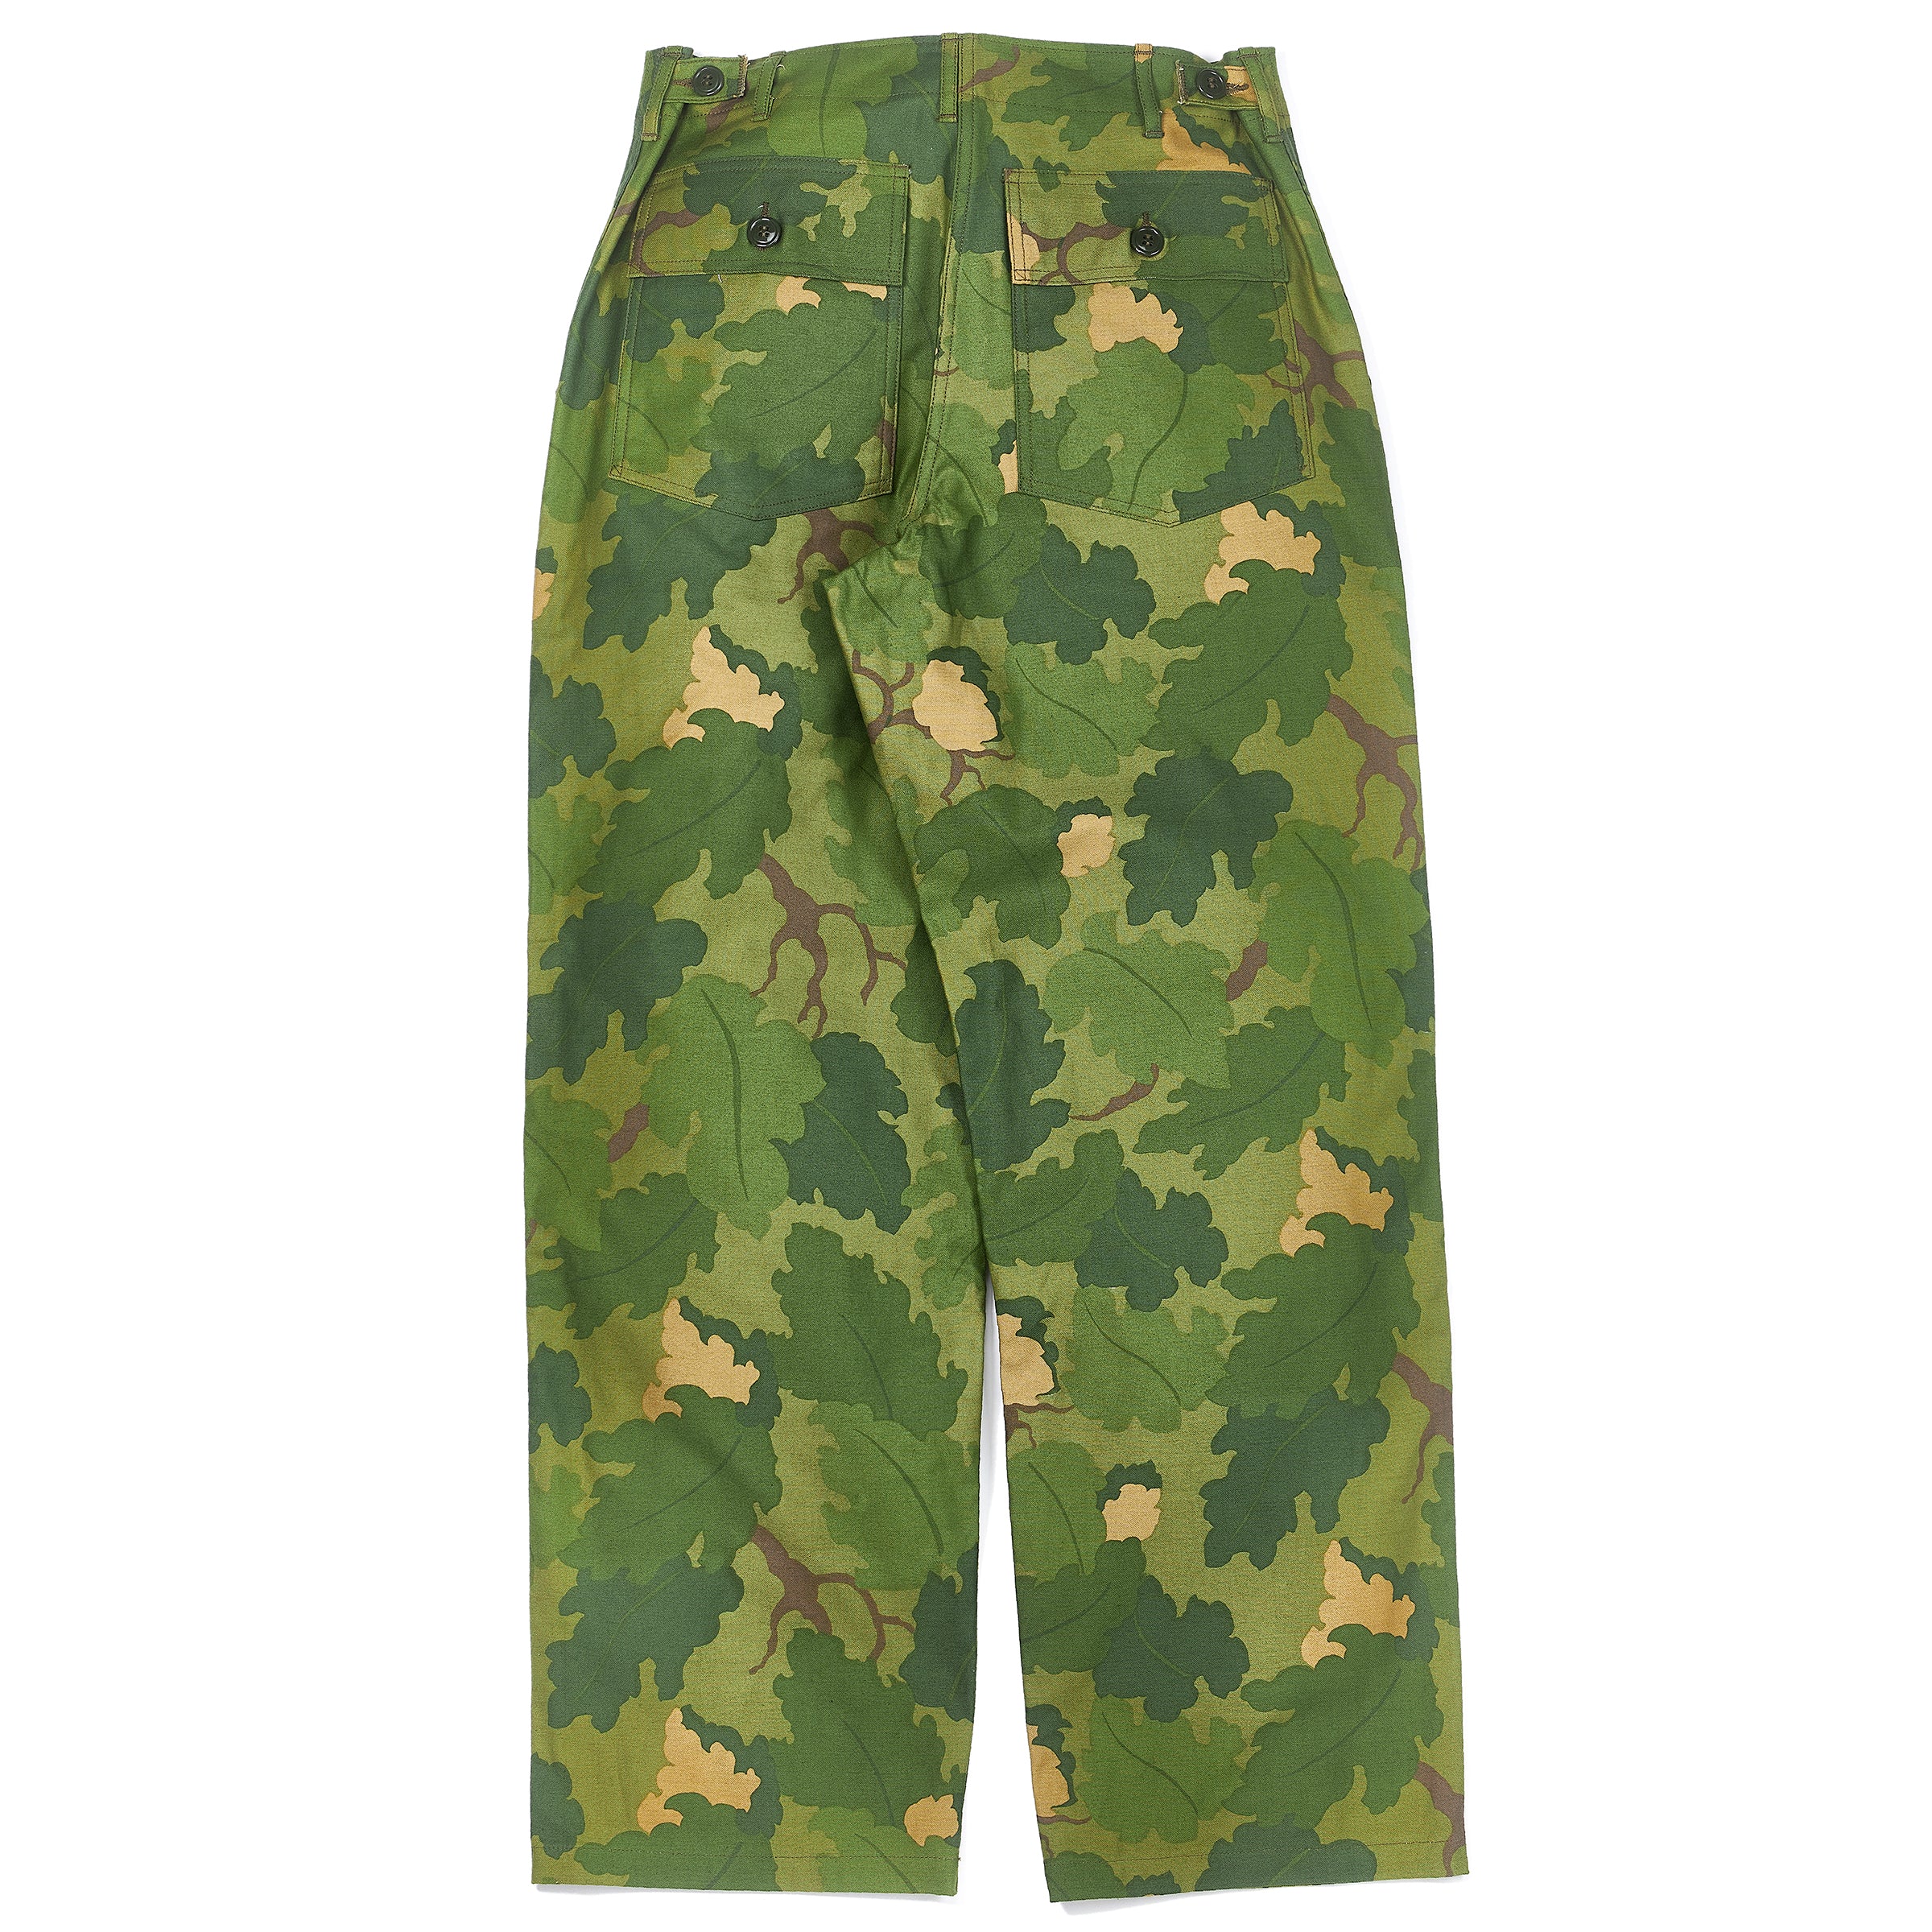 Original Hungarian Army Camo Pants Issue Desert Combat Field Troops Trousers